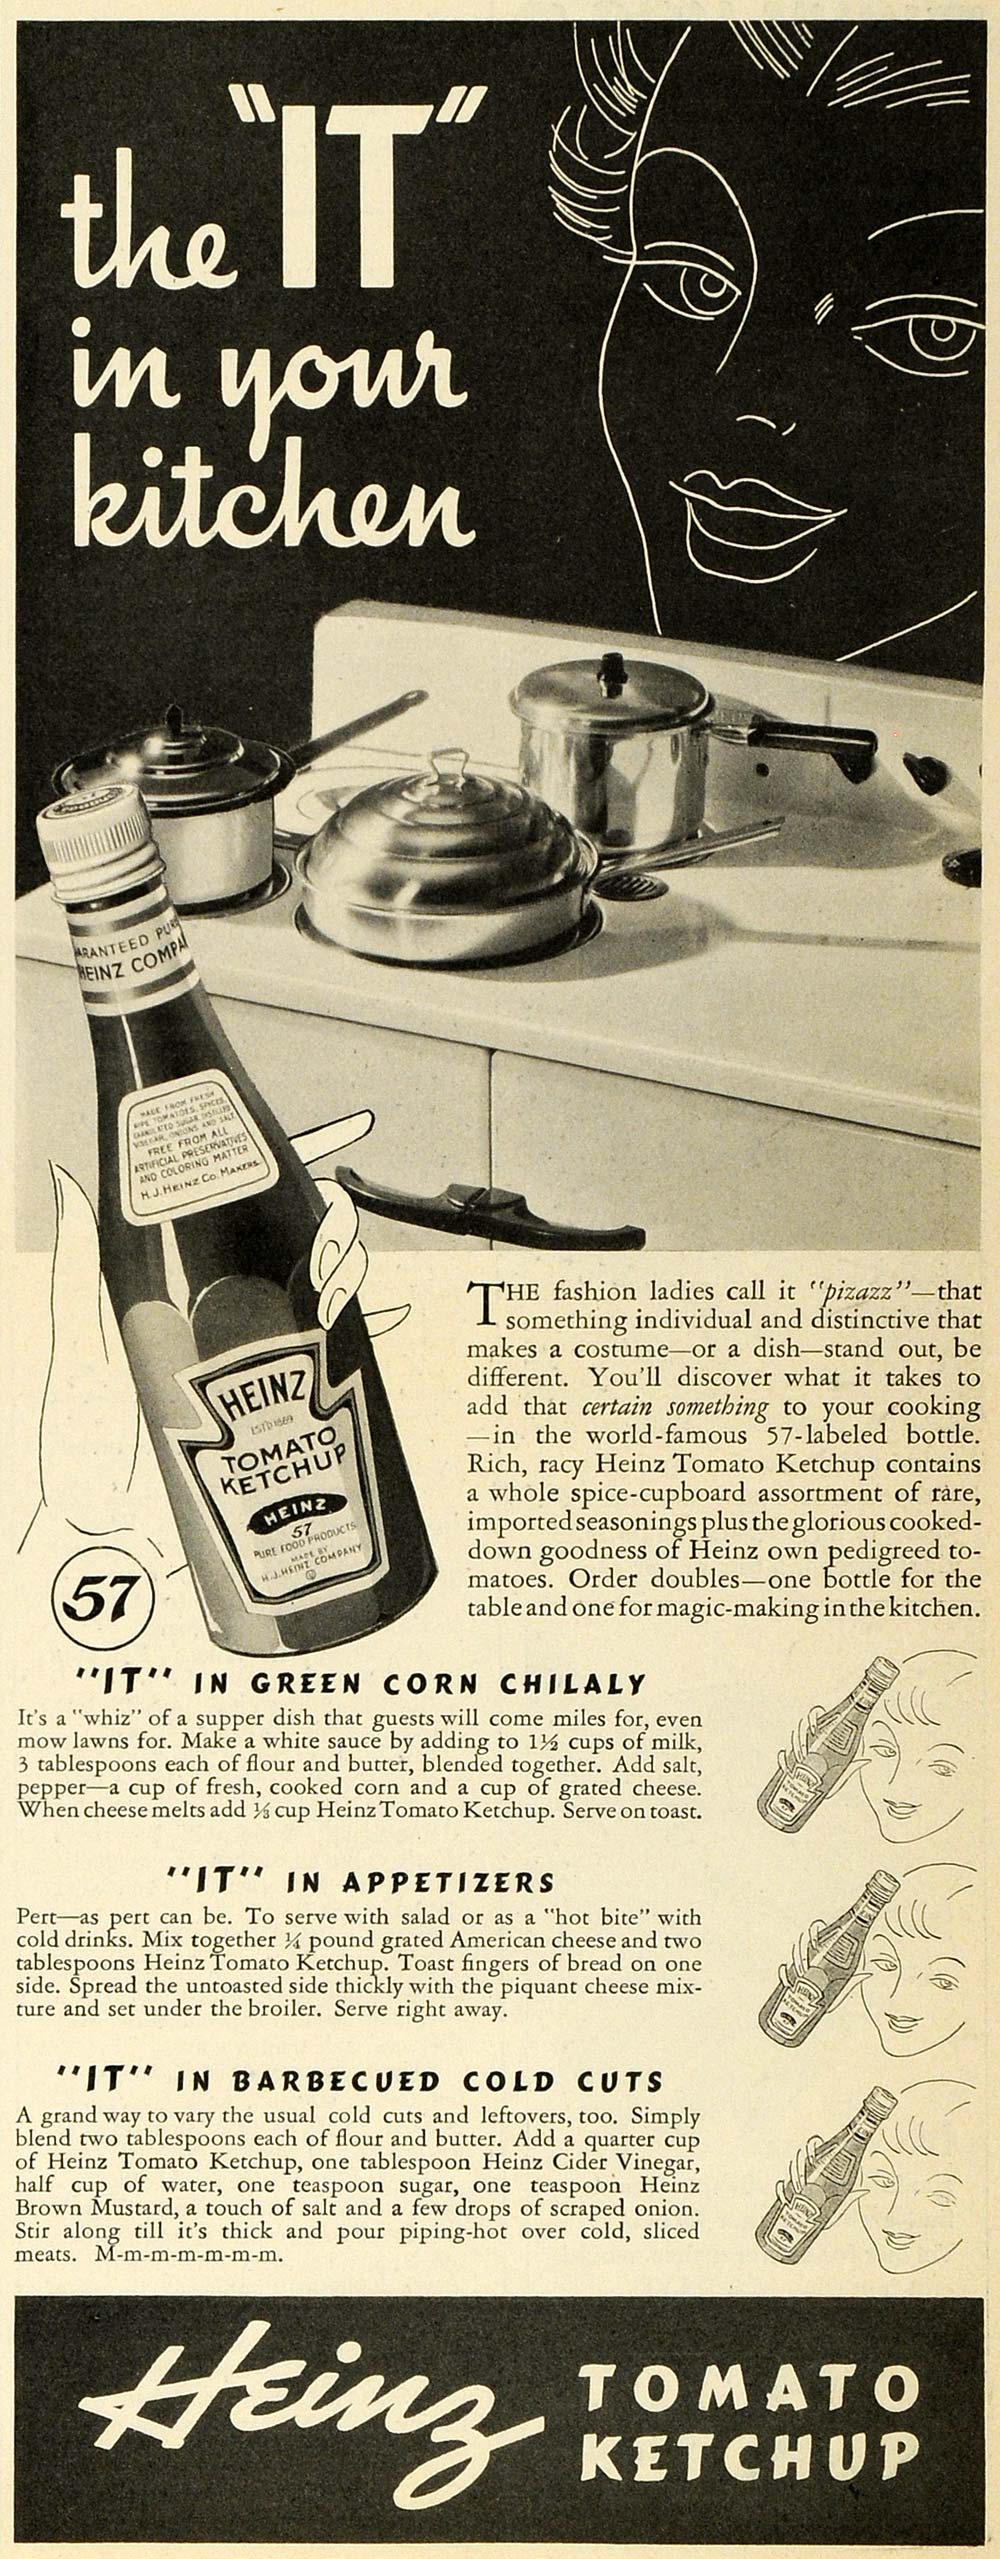 1937 Ad Heinz Tomato Ketchup Puts IT in Corn Chilaly - ORIGINAL ADVERTISING MCC5